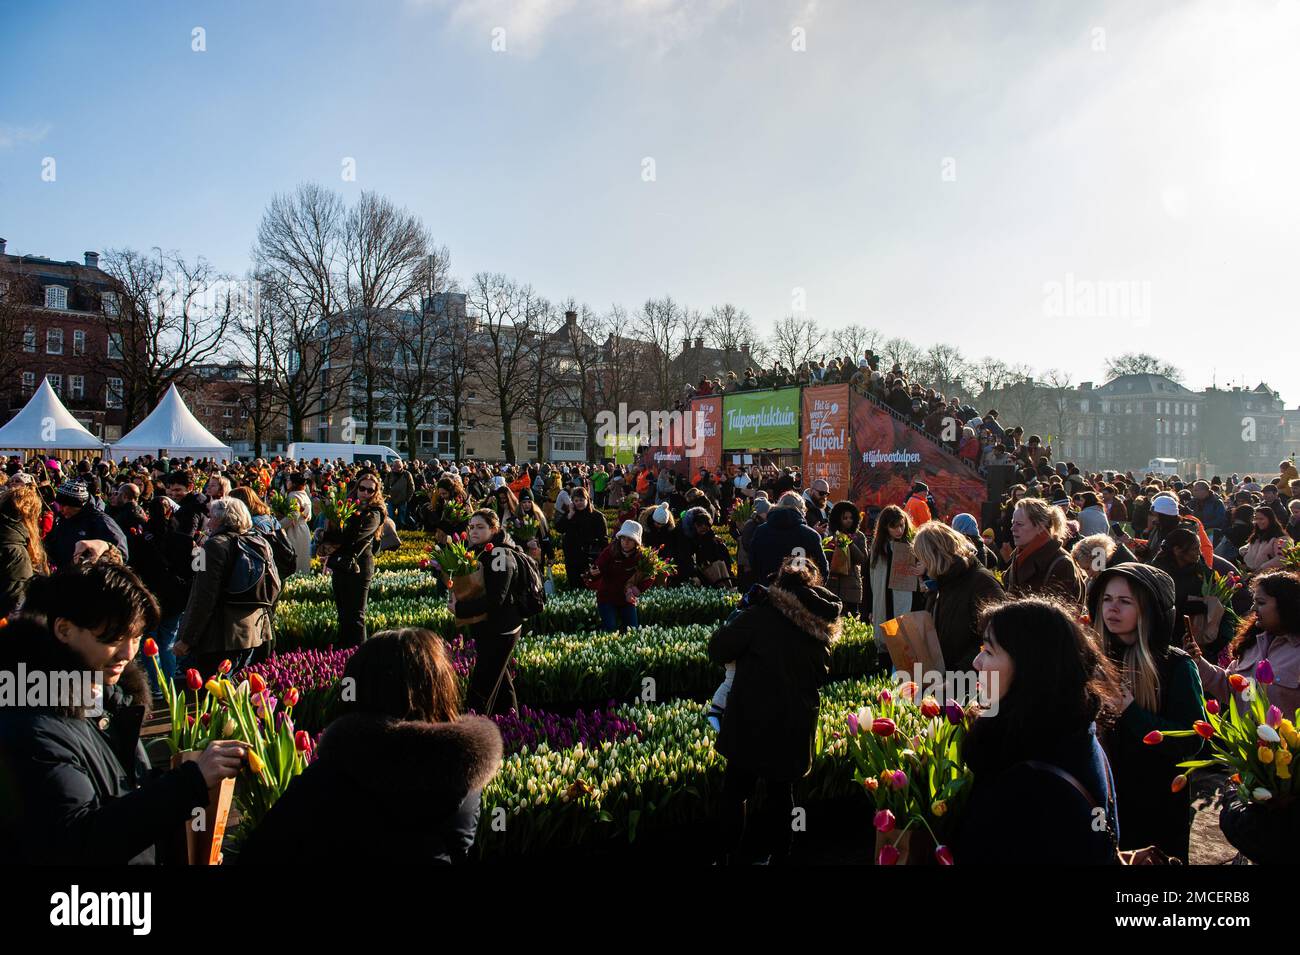 Thousands of people are seen taking tulips for free. Each year on the 3rd Saturday of January, the National Tulip Day is celebrated in Amsterdam. Dutch tulip growers built a huge picking garden with more than 200,000 colorful tulips at the Museumplein in Amsterdam. Visitors are allowed to pick tulips for free. The event was opened by Olympic skating champion, Irene Schouten. Prior to the opening, she christened a new tulip: Tulipa 'Dutch Pearl' as a reference to the world - famous painting 'The girl with a pearl earring' by Johannes Vermeer. Stock Photo